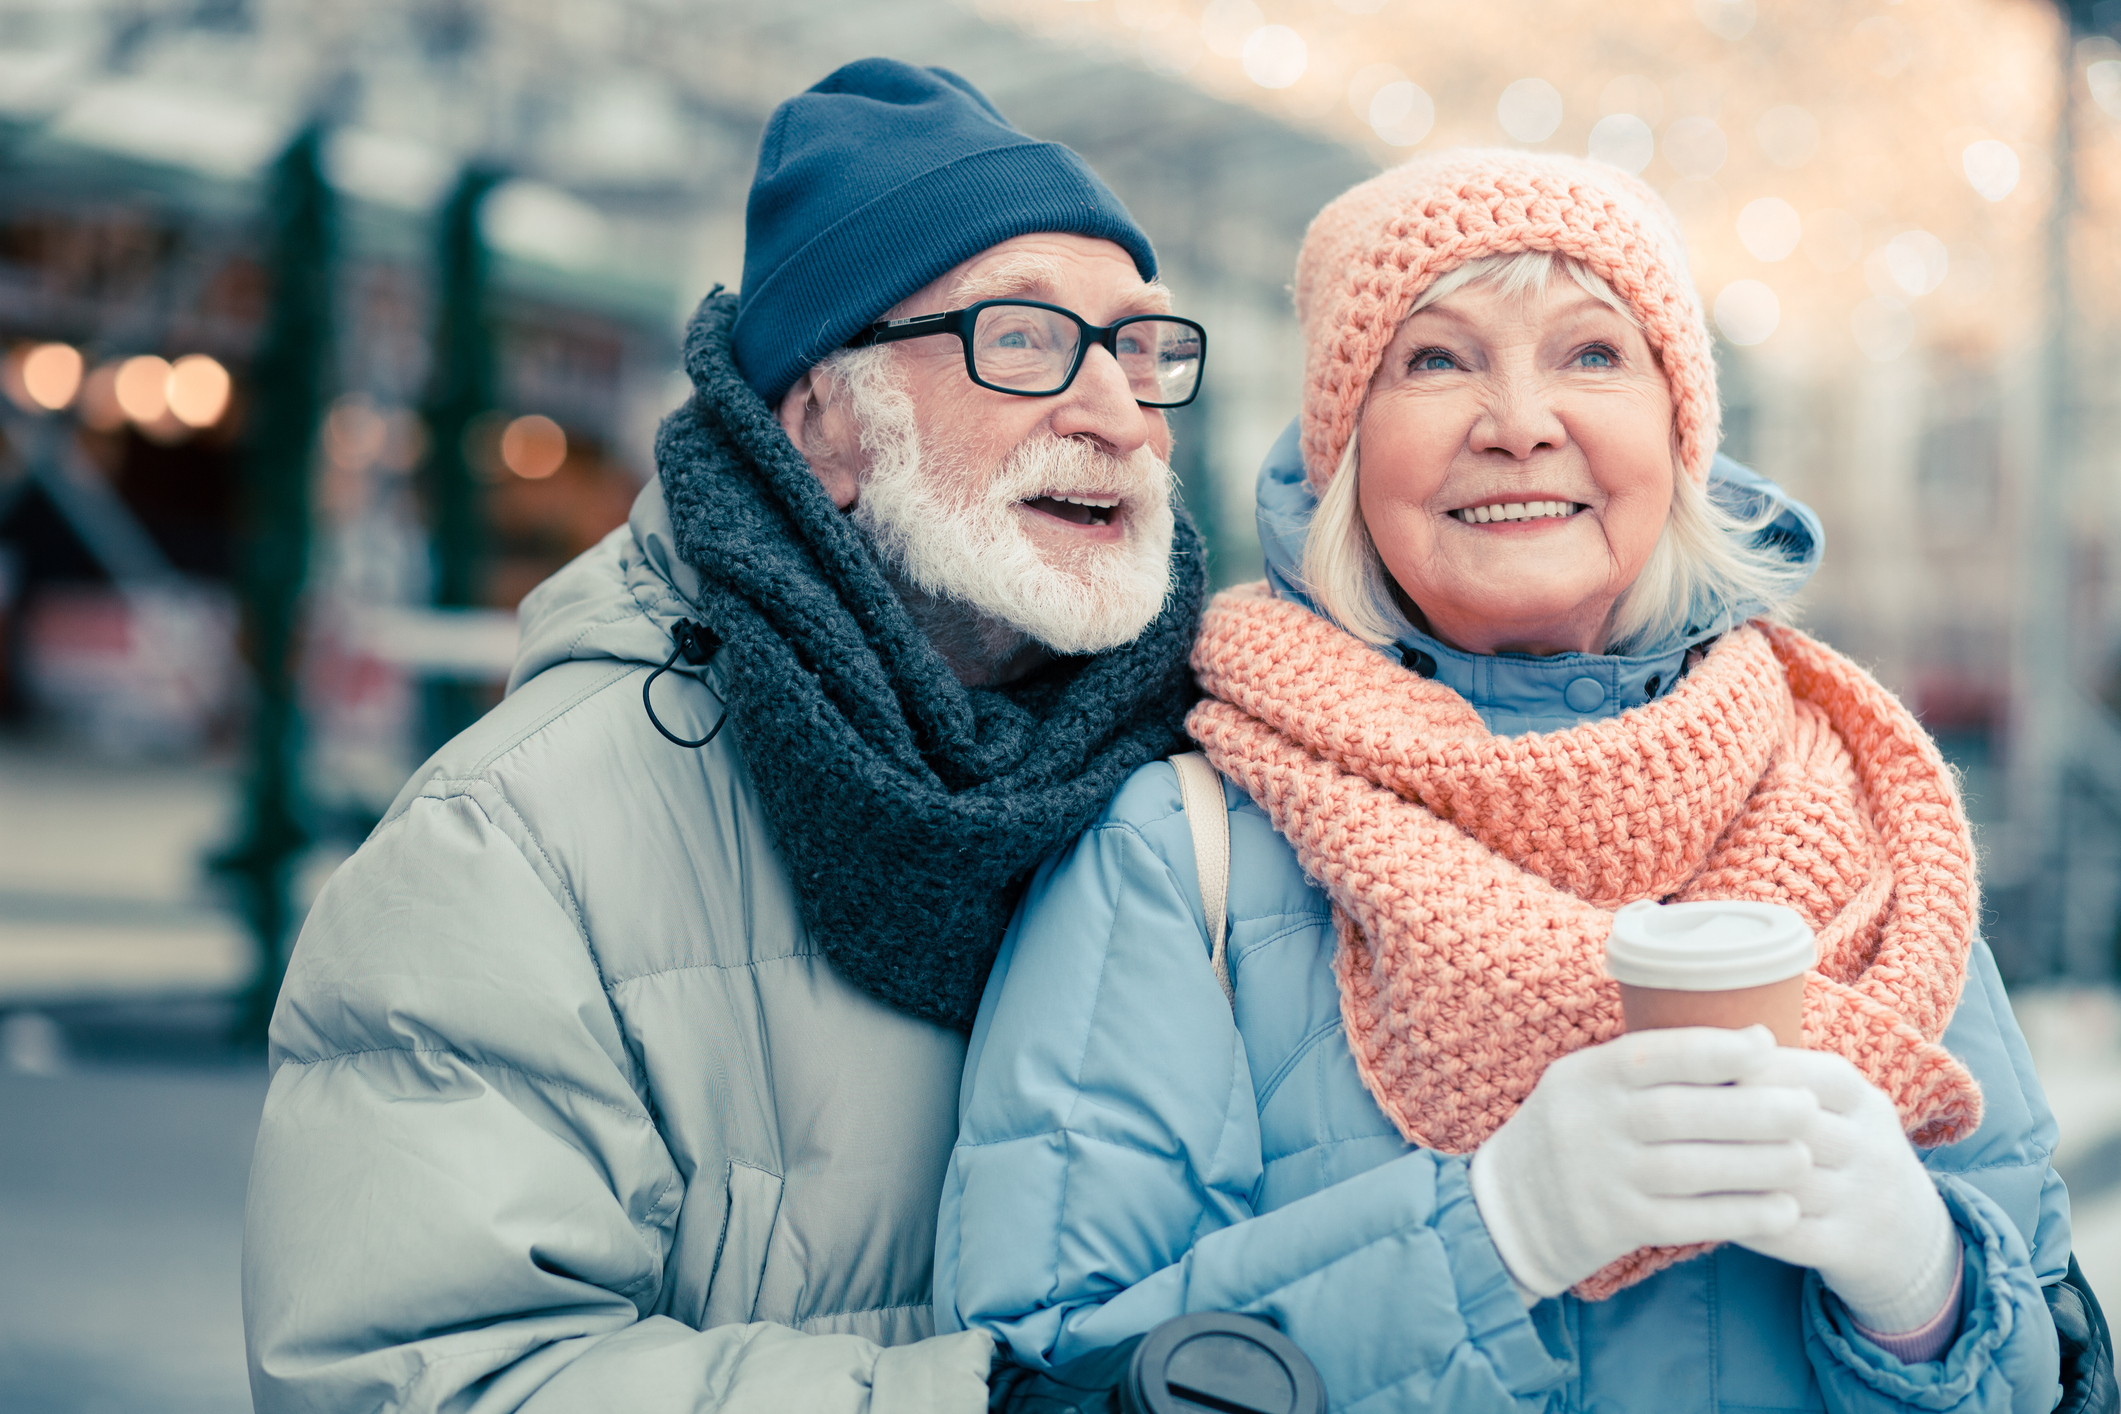 A senior couple following cold weather safety tips as they share a moment in the winter snow.